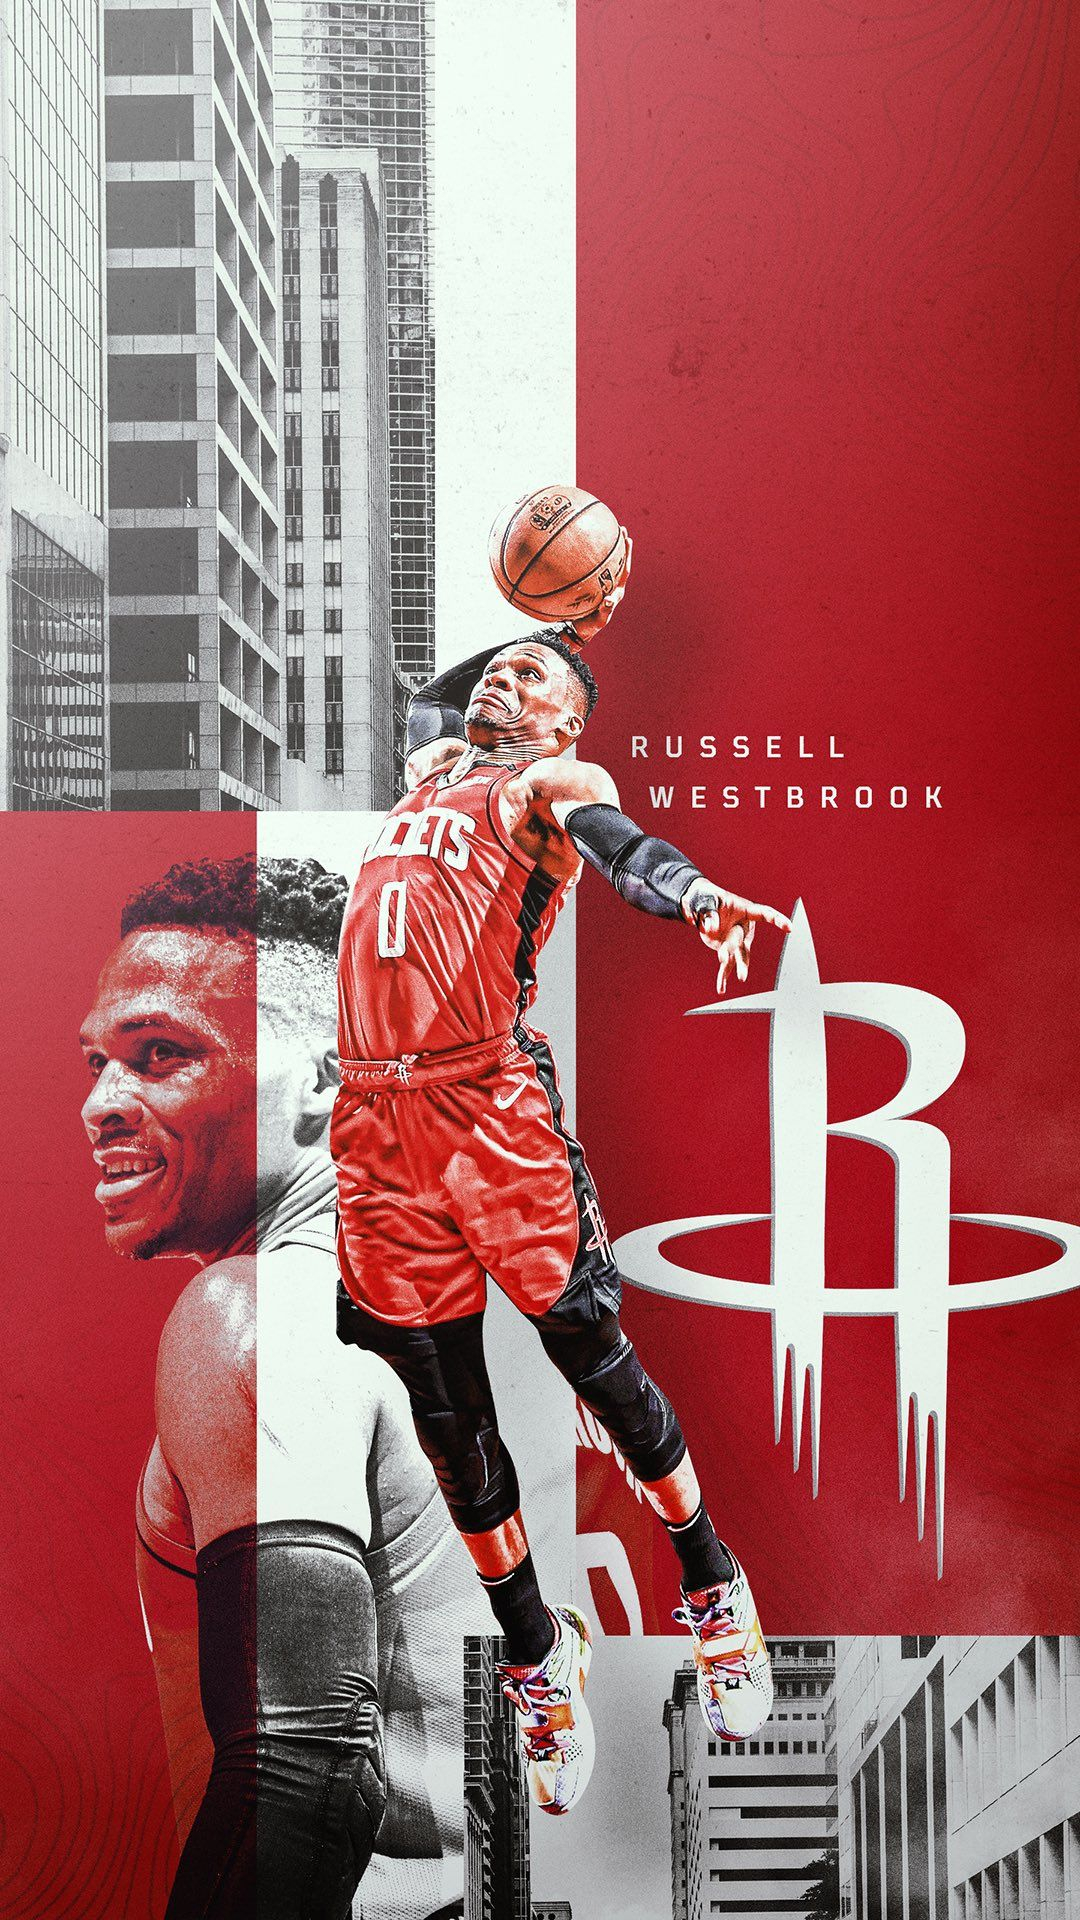 1080x1920 Pin by jeremiah griffith on ALL NBA PLAYERS | Basketball wallpaper, Mvp basketball, Westbrook wallpapers